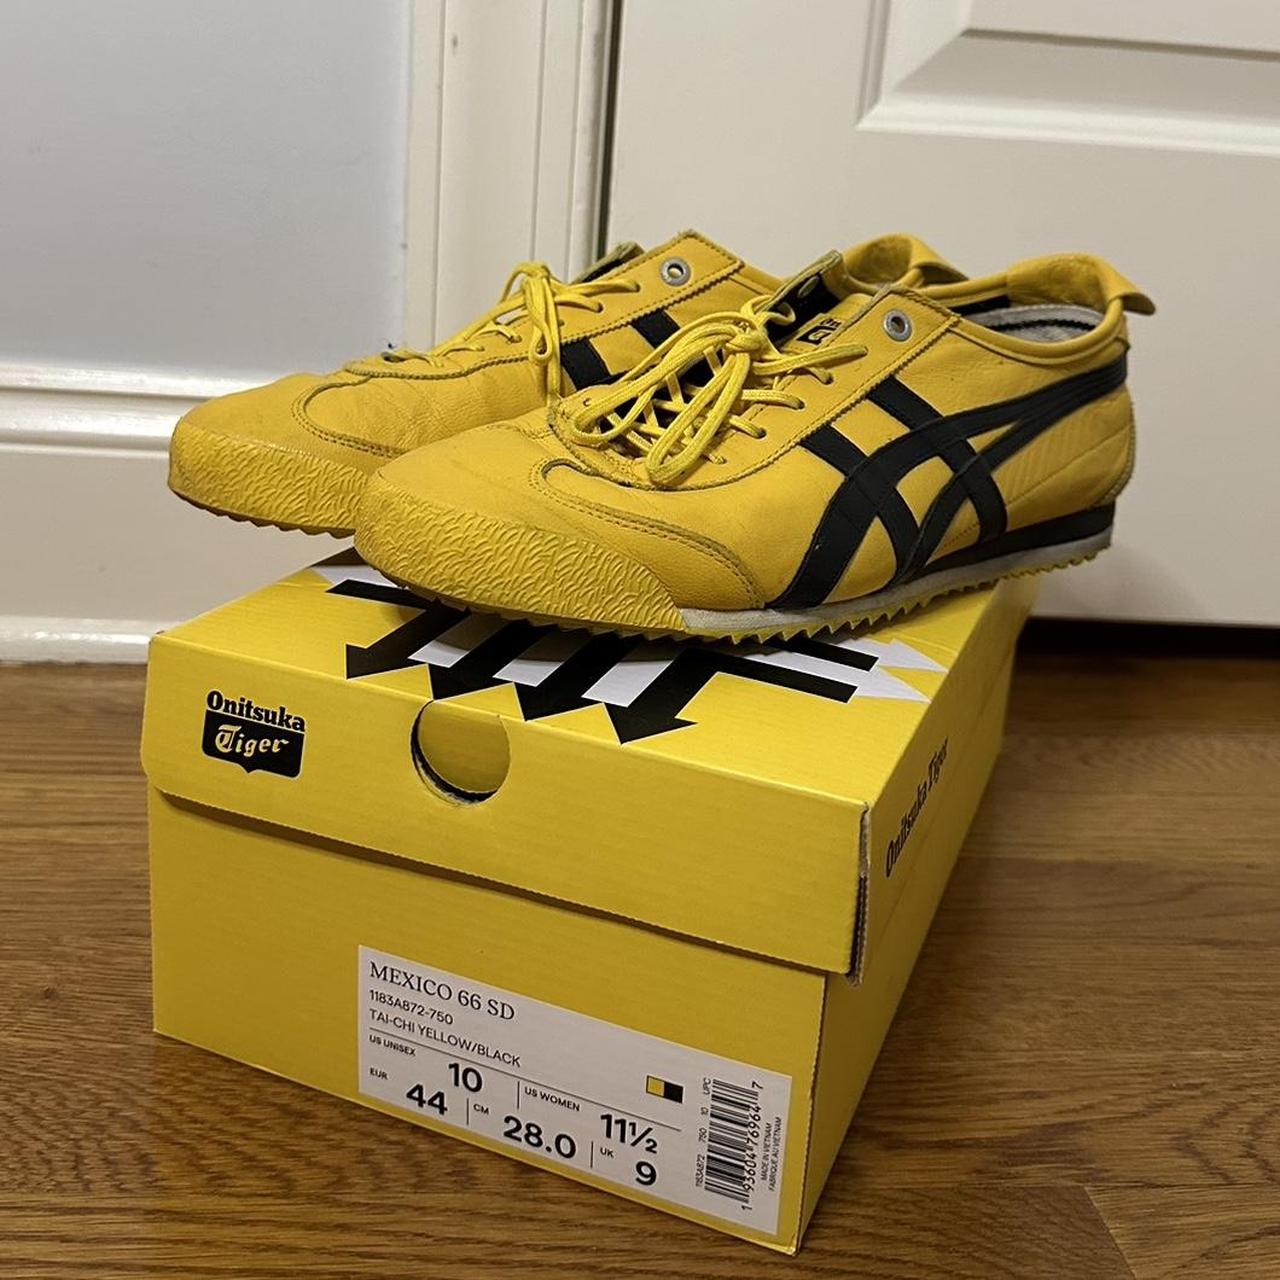 Onitsuka Tiger Mexico 66 SD Sneakers! Decently... - Depop